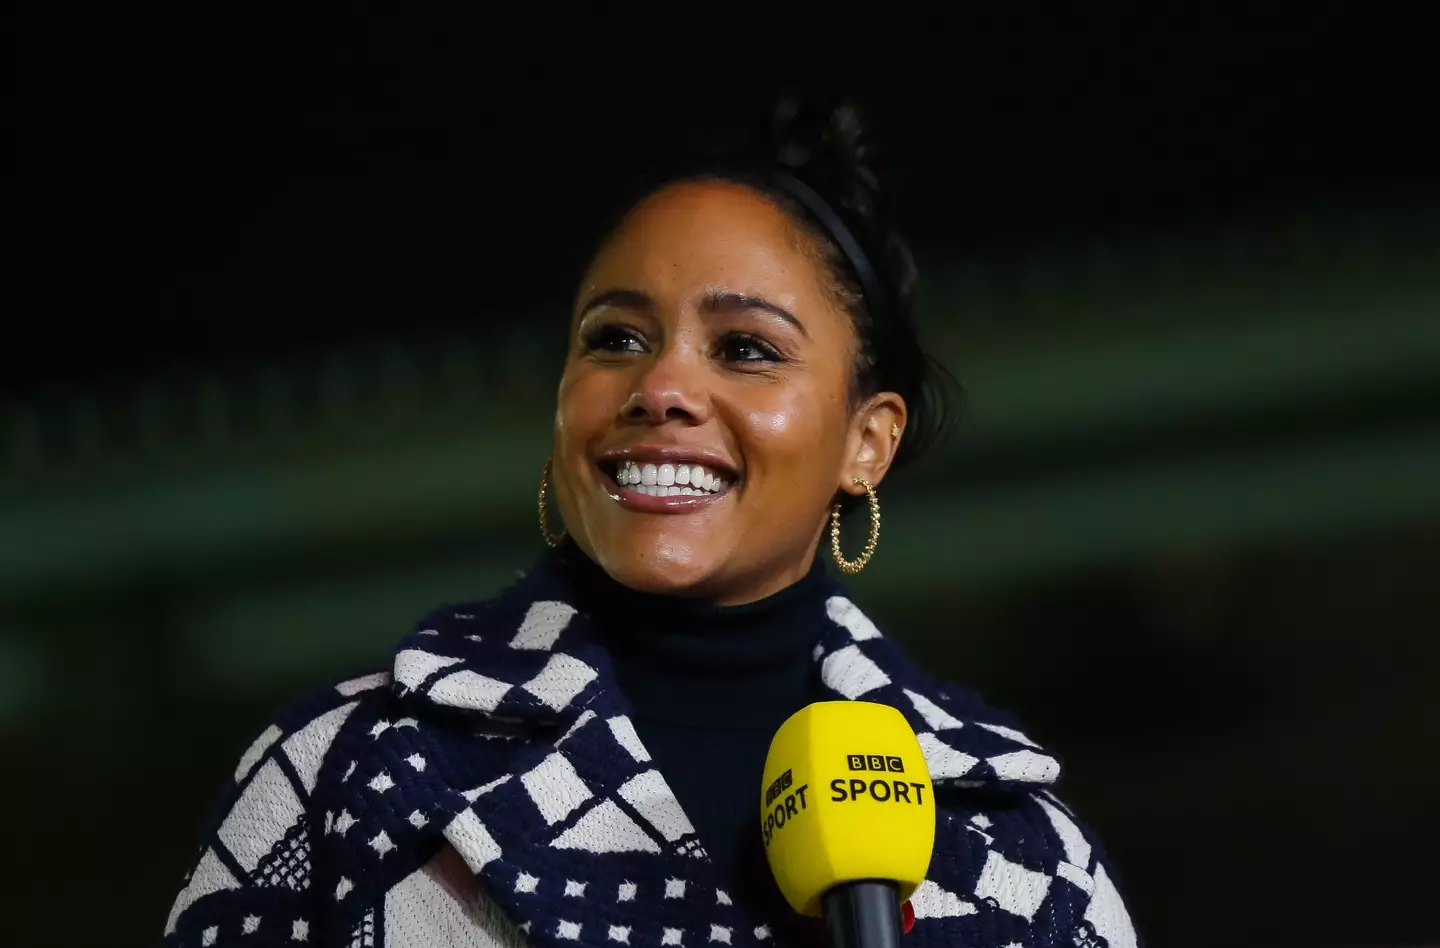 Criticism of Alex Scott's speech was deeply offensive to many (